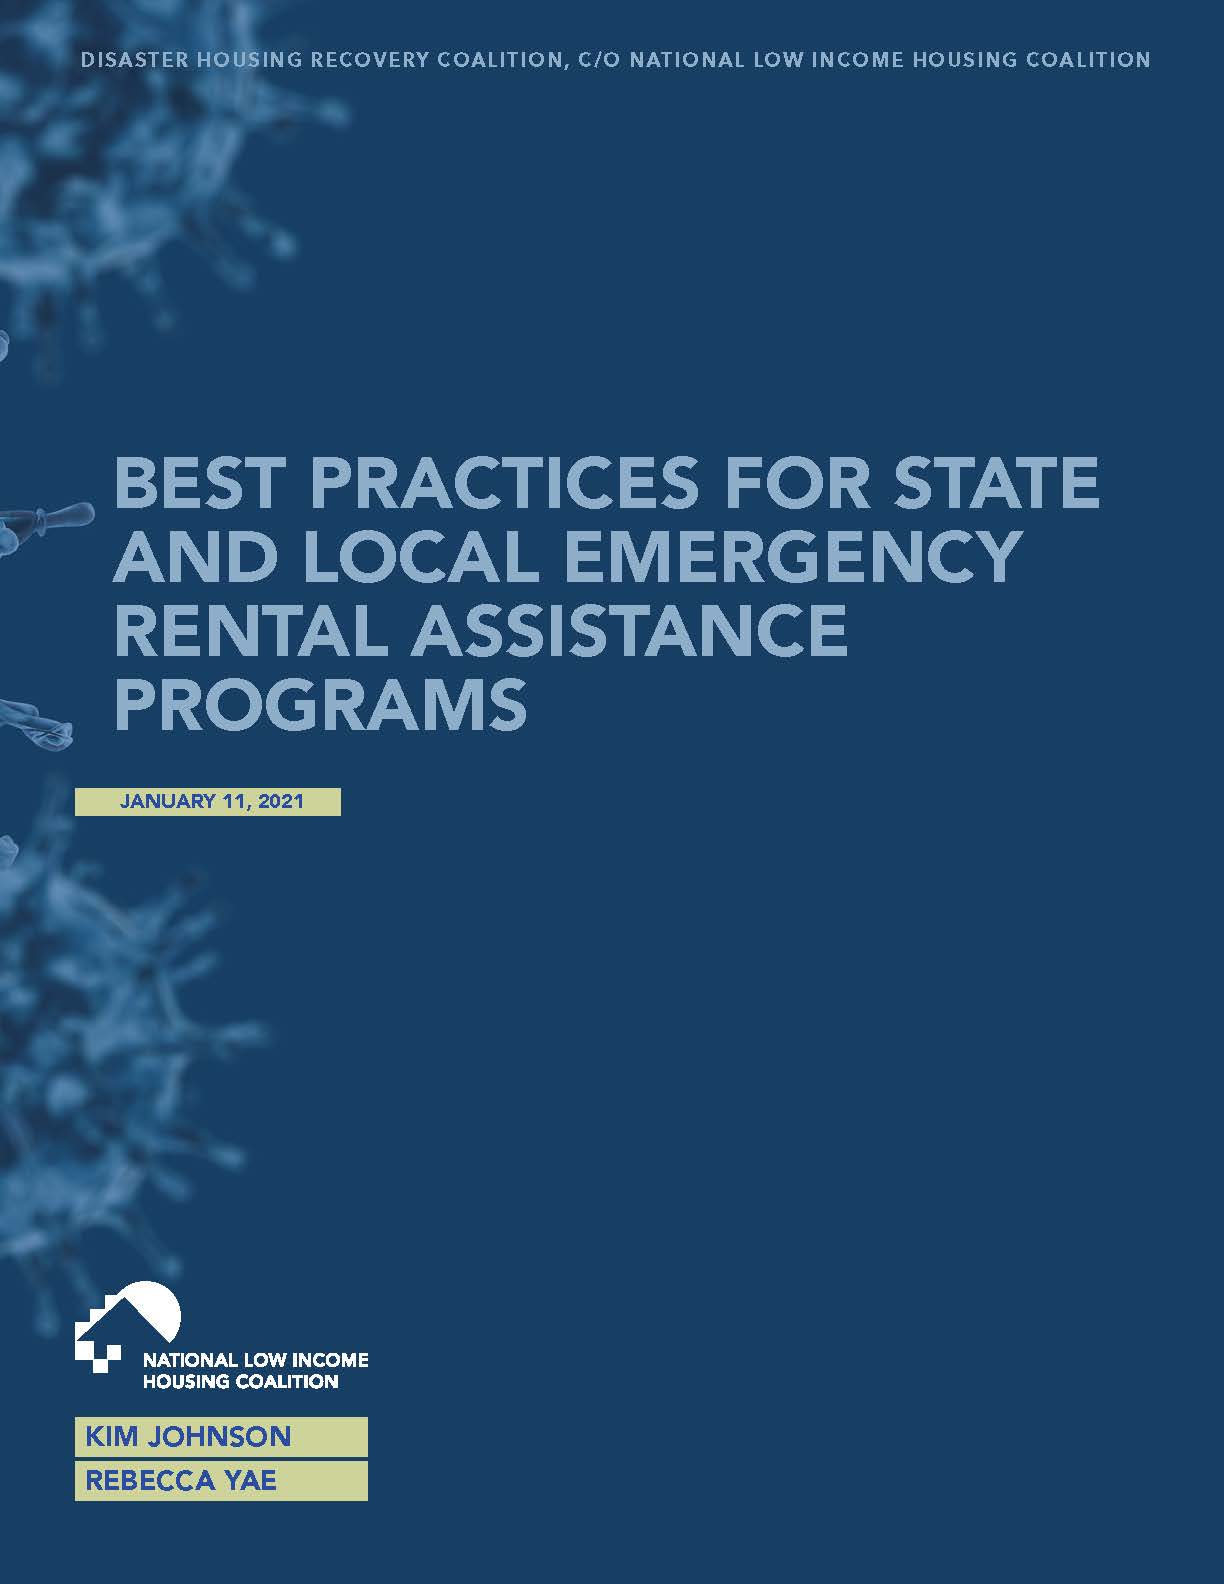 Best Practices for State and Local Emergency Rental Assistance Programs